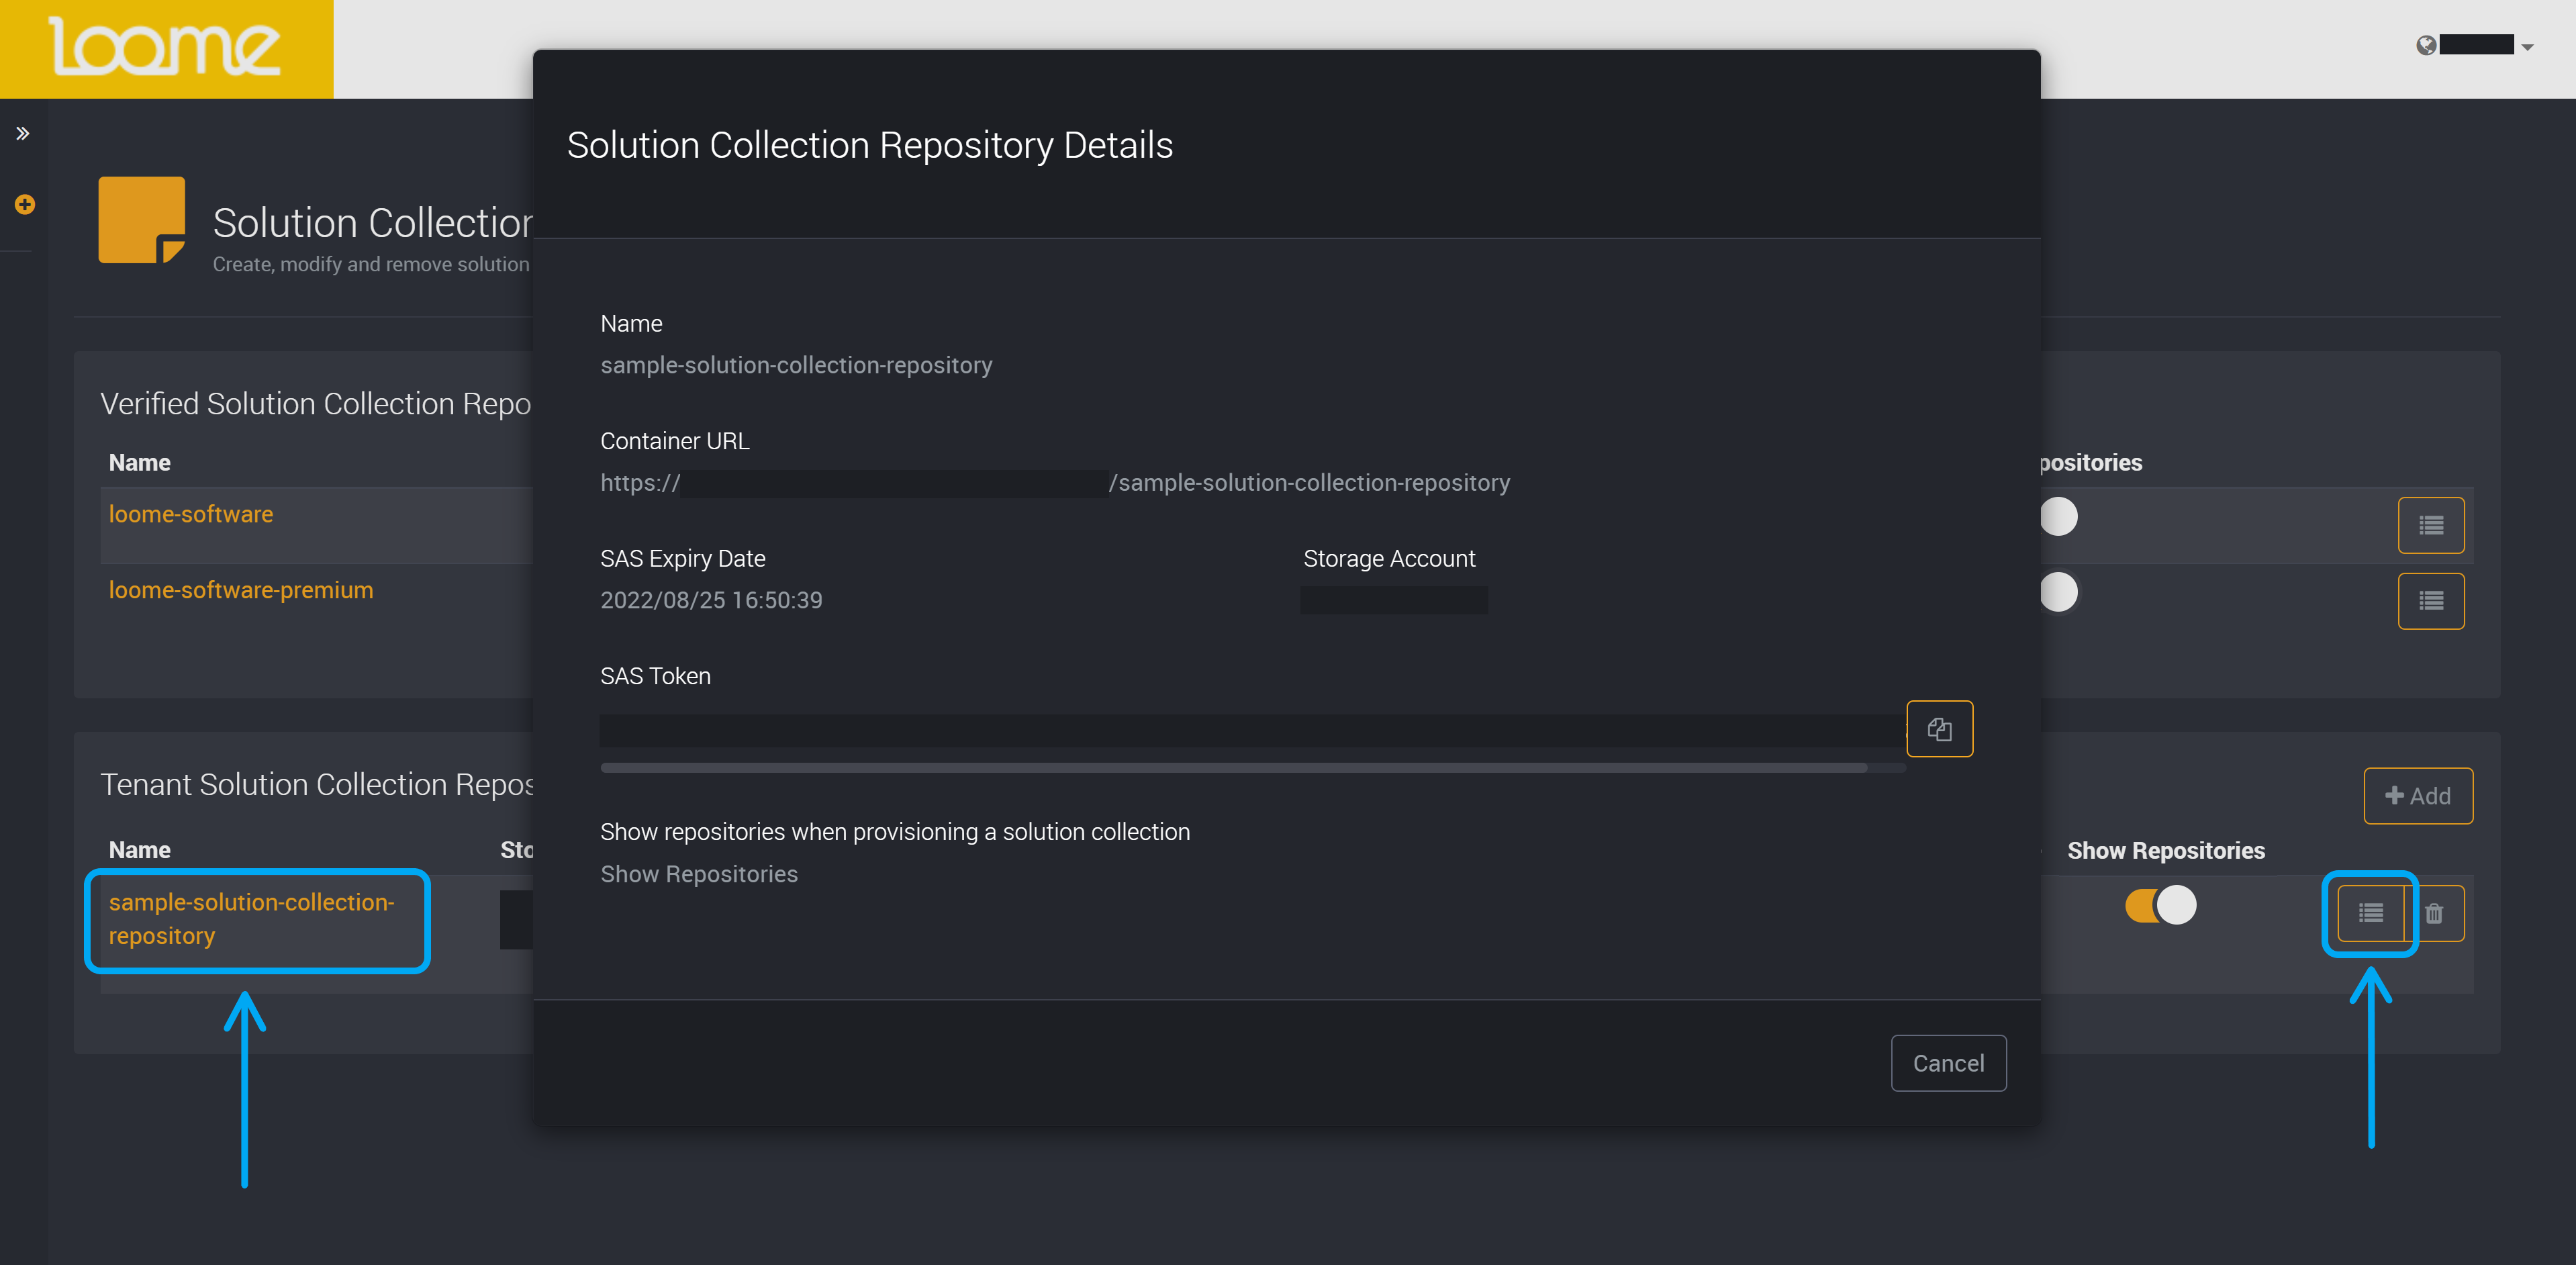 View the details of solution collection repositories